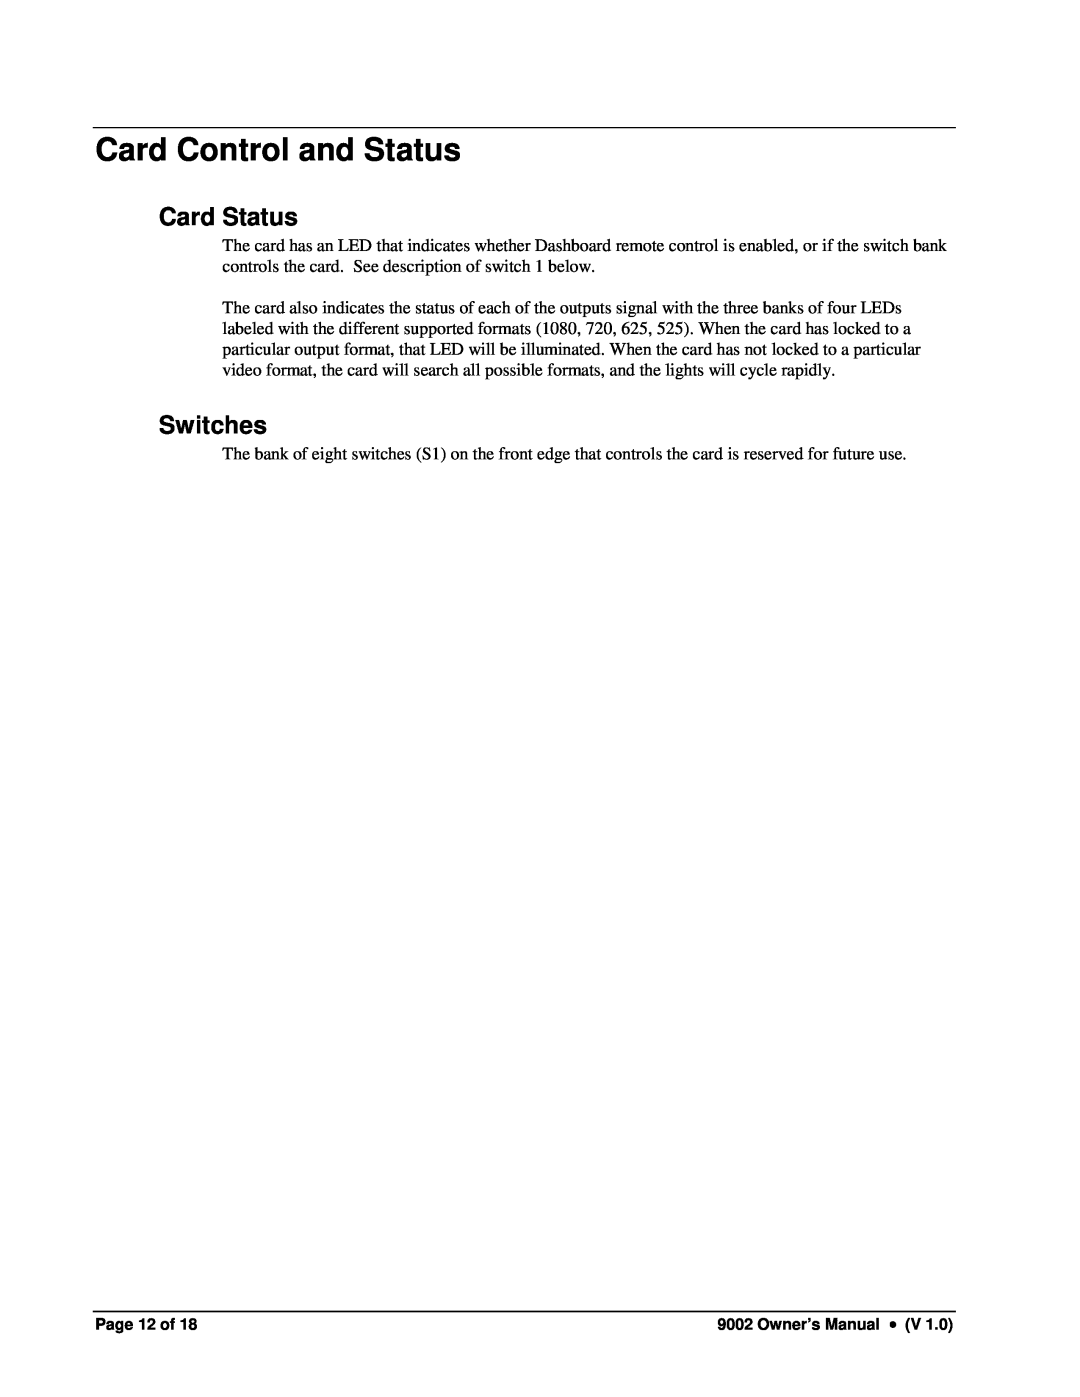 Cobalt Networks 9002 owner manual Card Control and Status, Card Status, Switches 